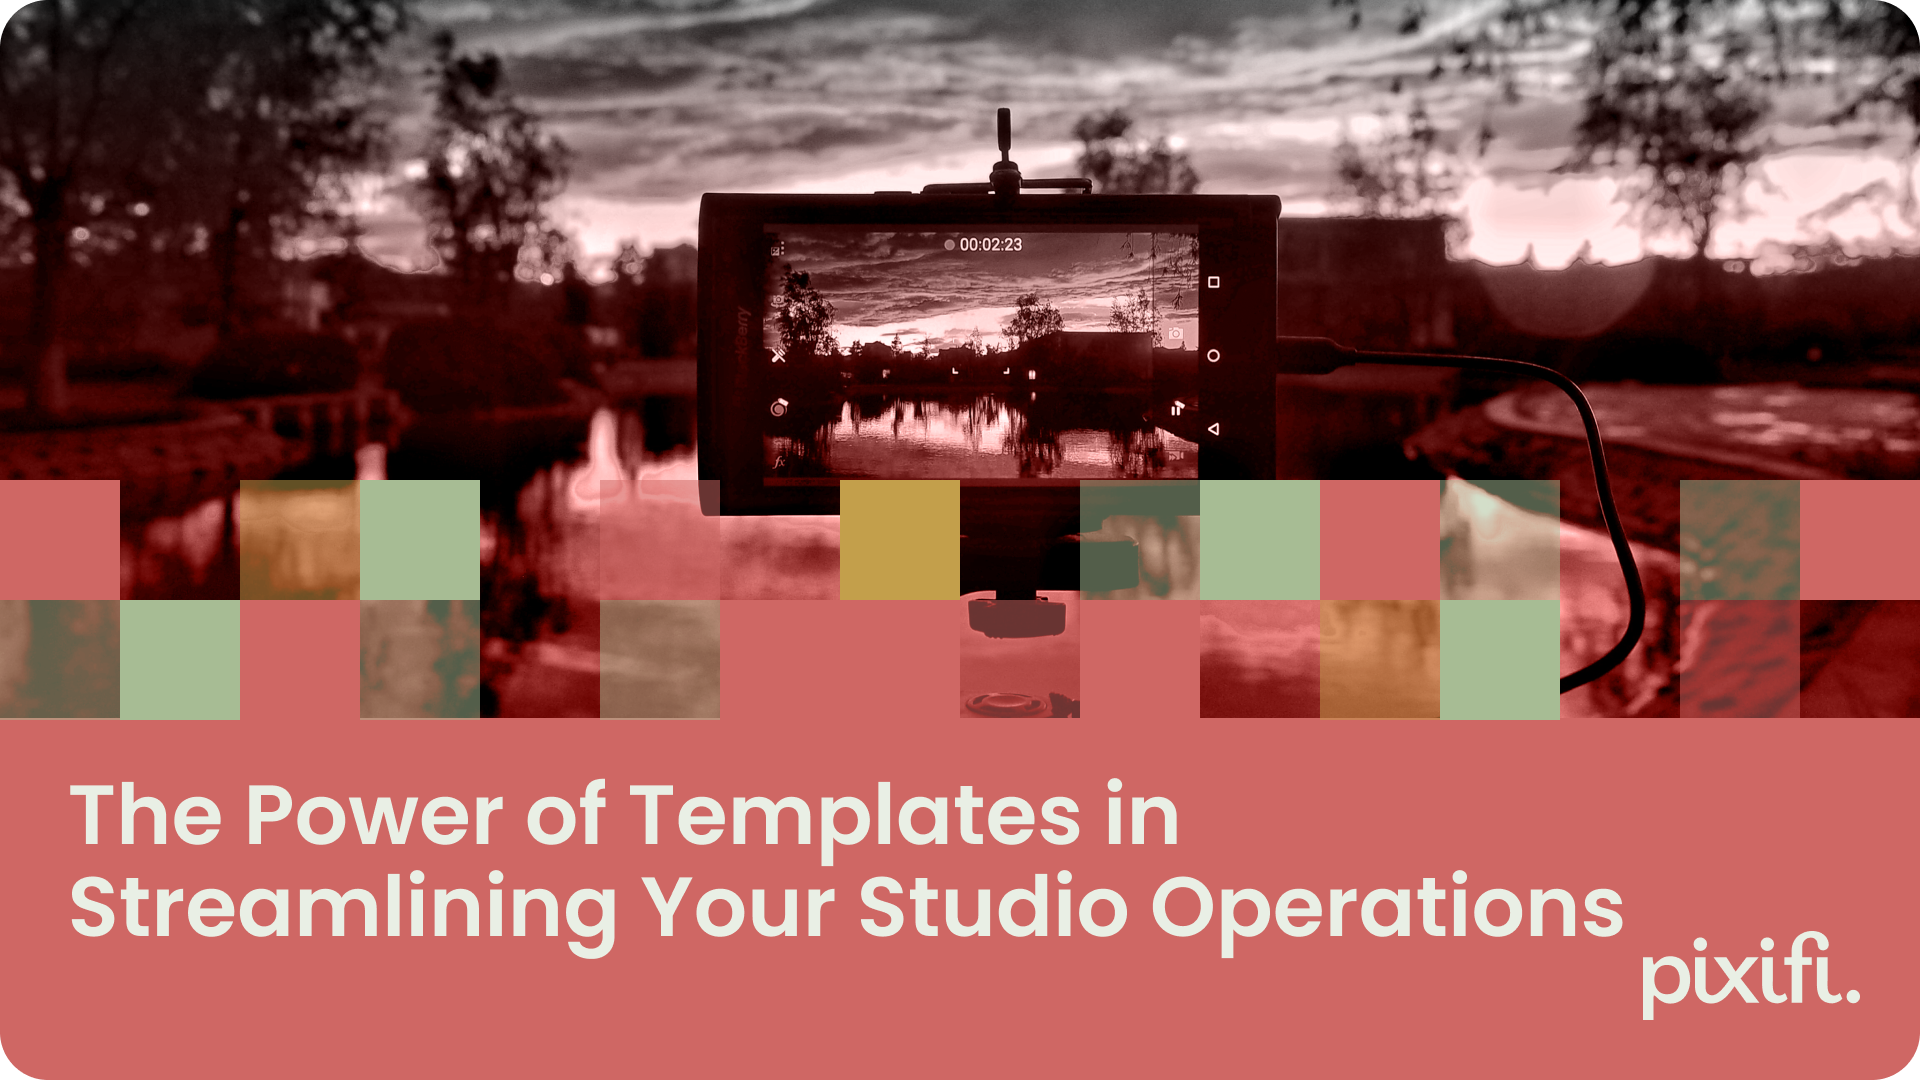 The Power of Templates in Streamlining Your Studio Operations